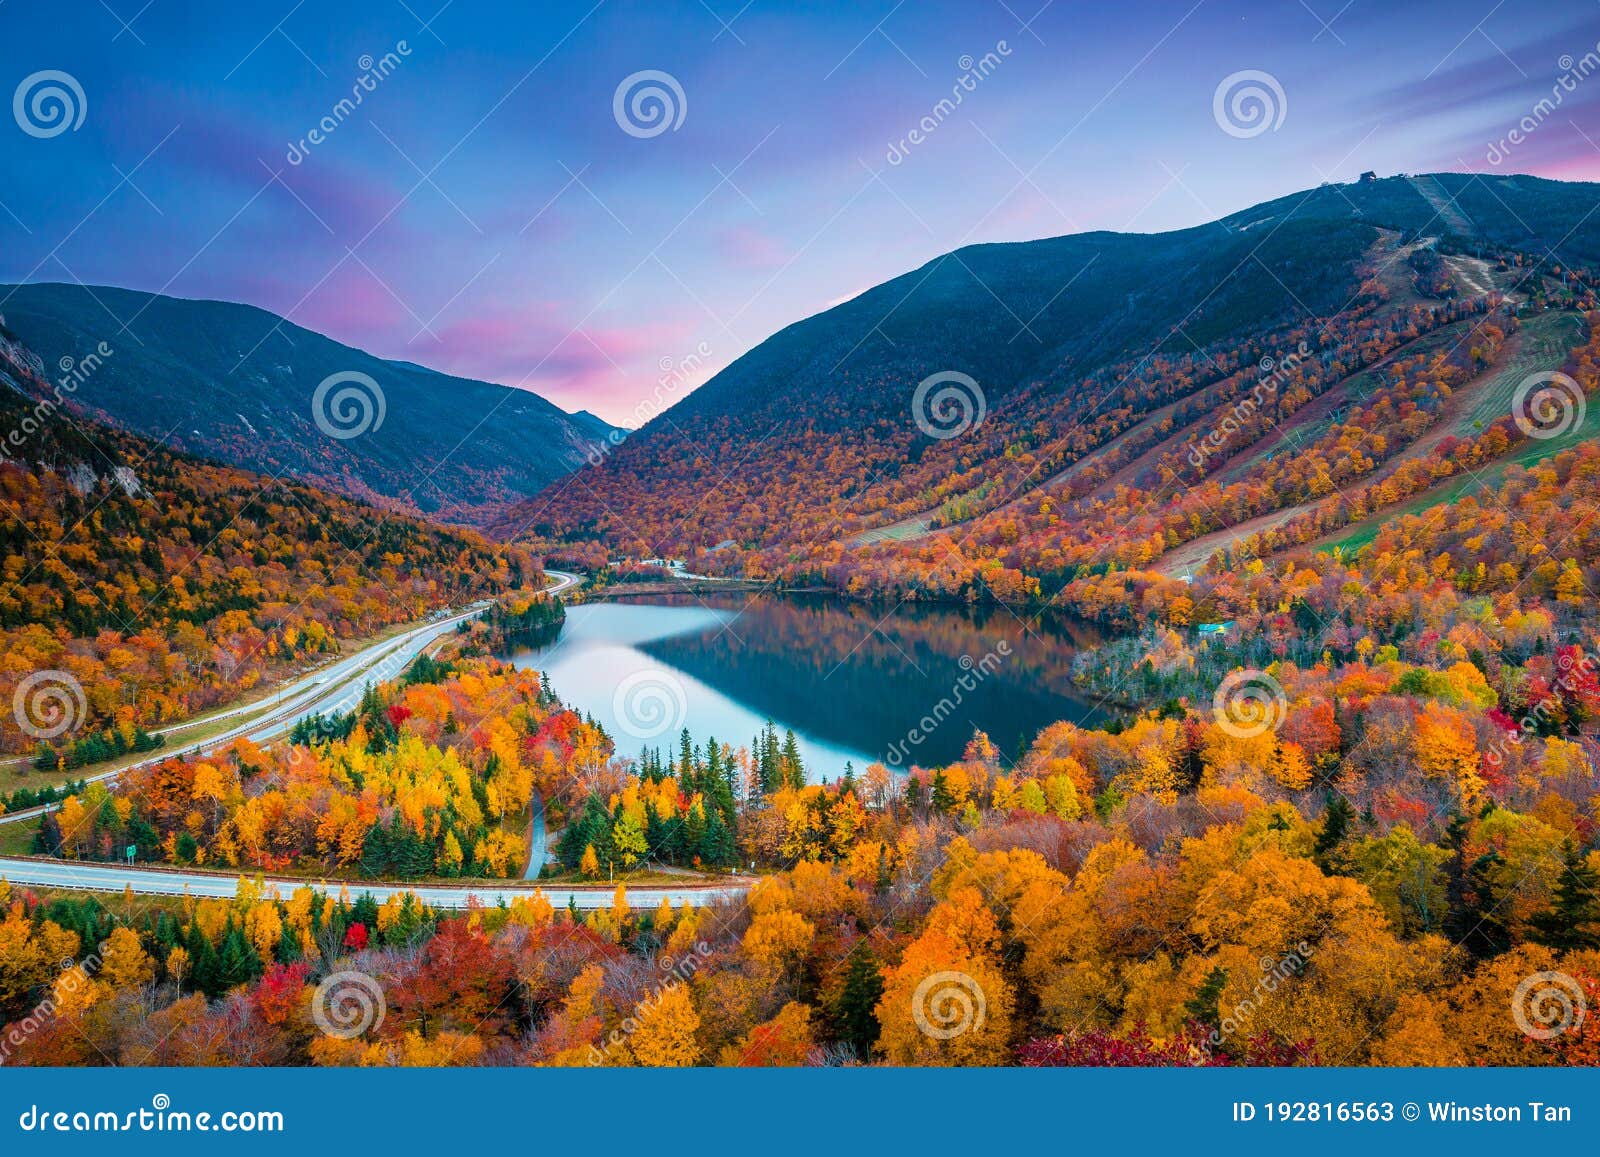 beautiful fall colors in franconia notch state park | white mountain national forest, new hampshire, usa